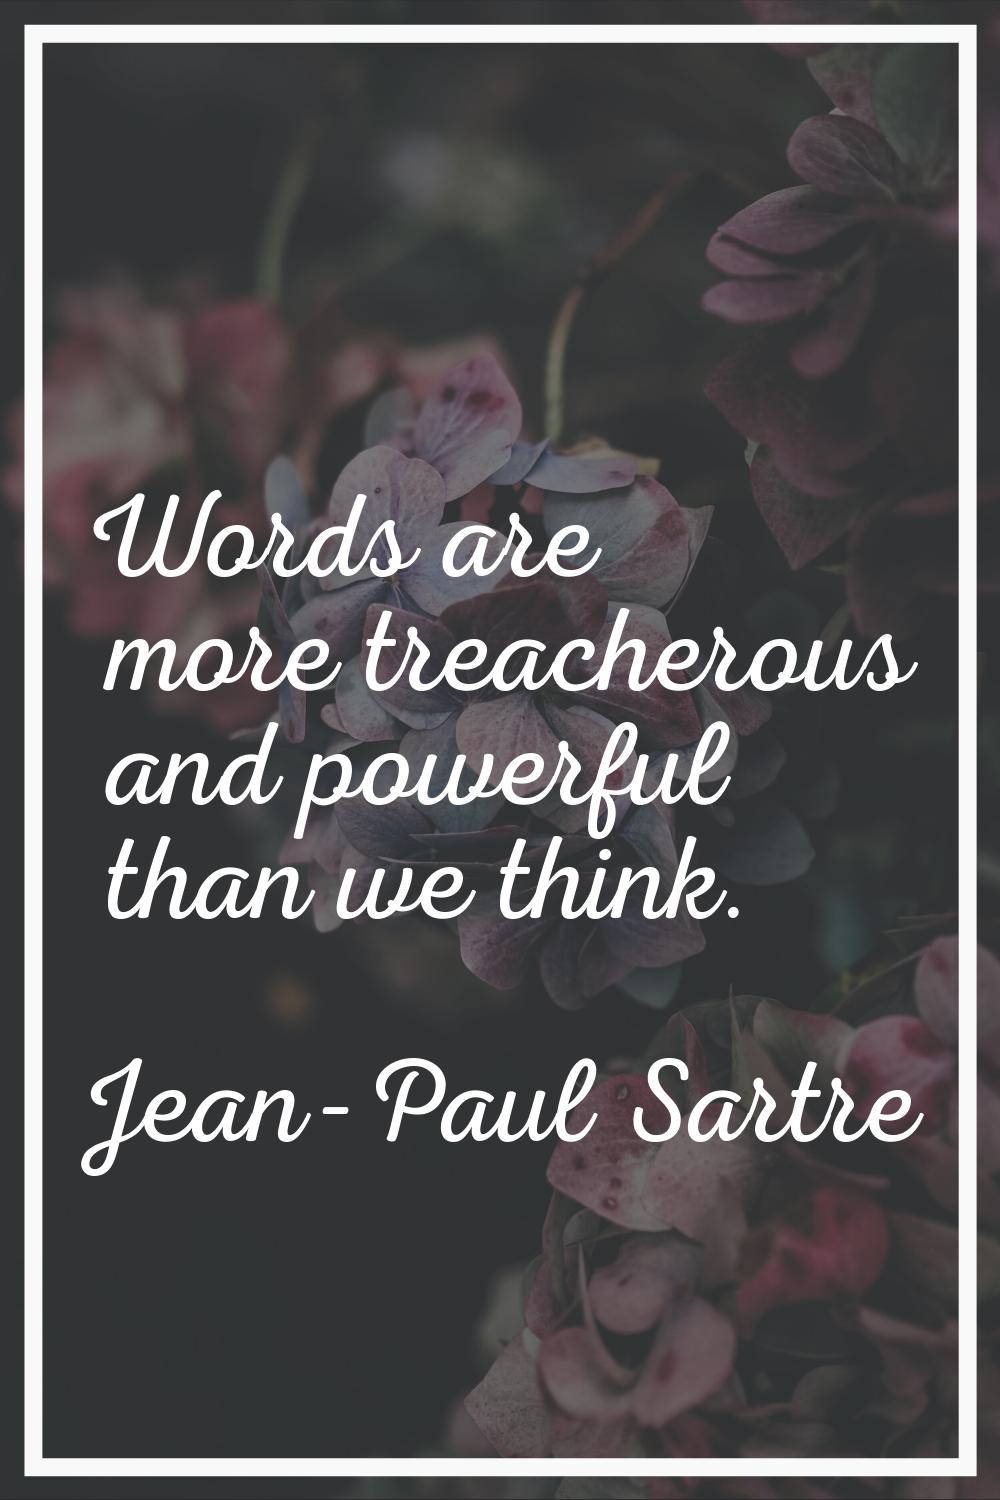 Words are more treacherous and powerful than we think.